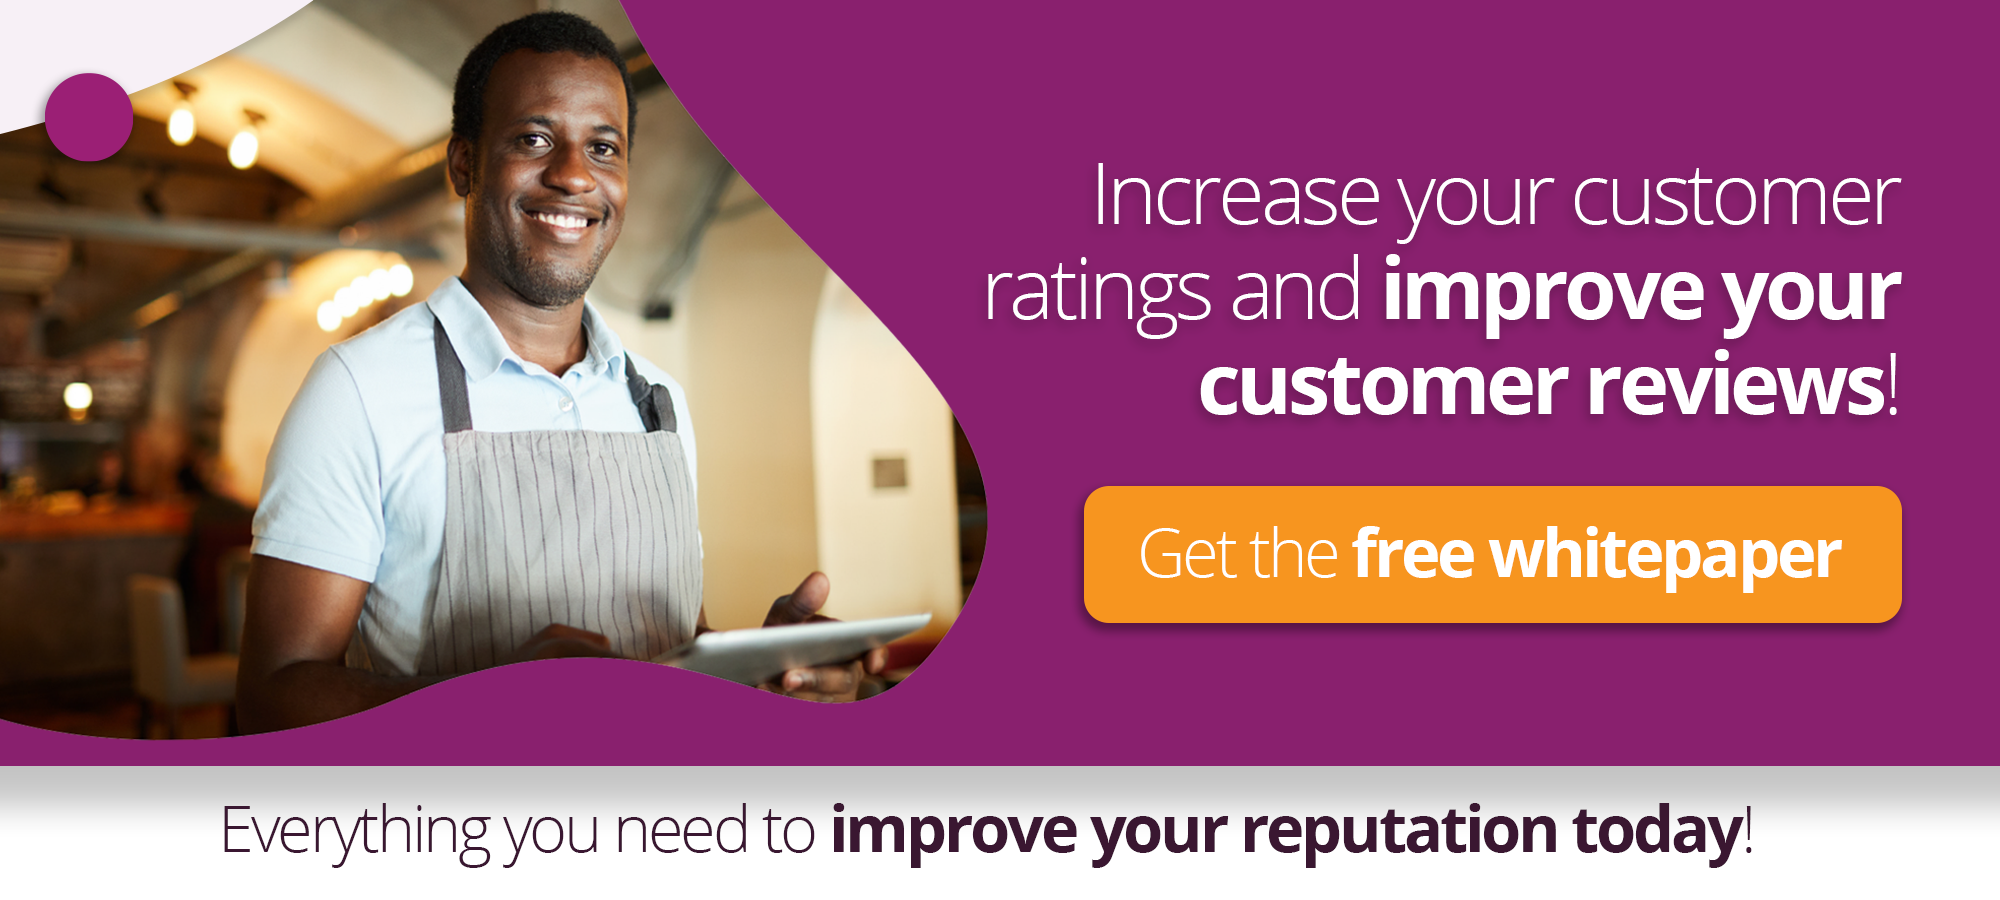 restaurant reputation management with ratings and reviews guide